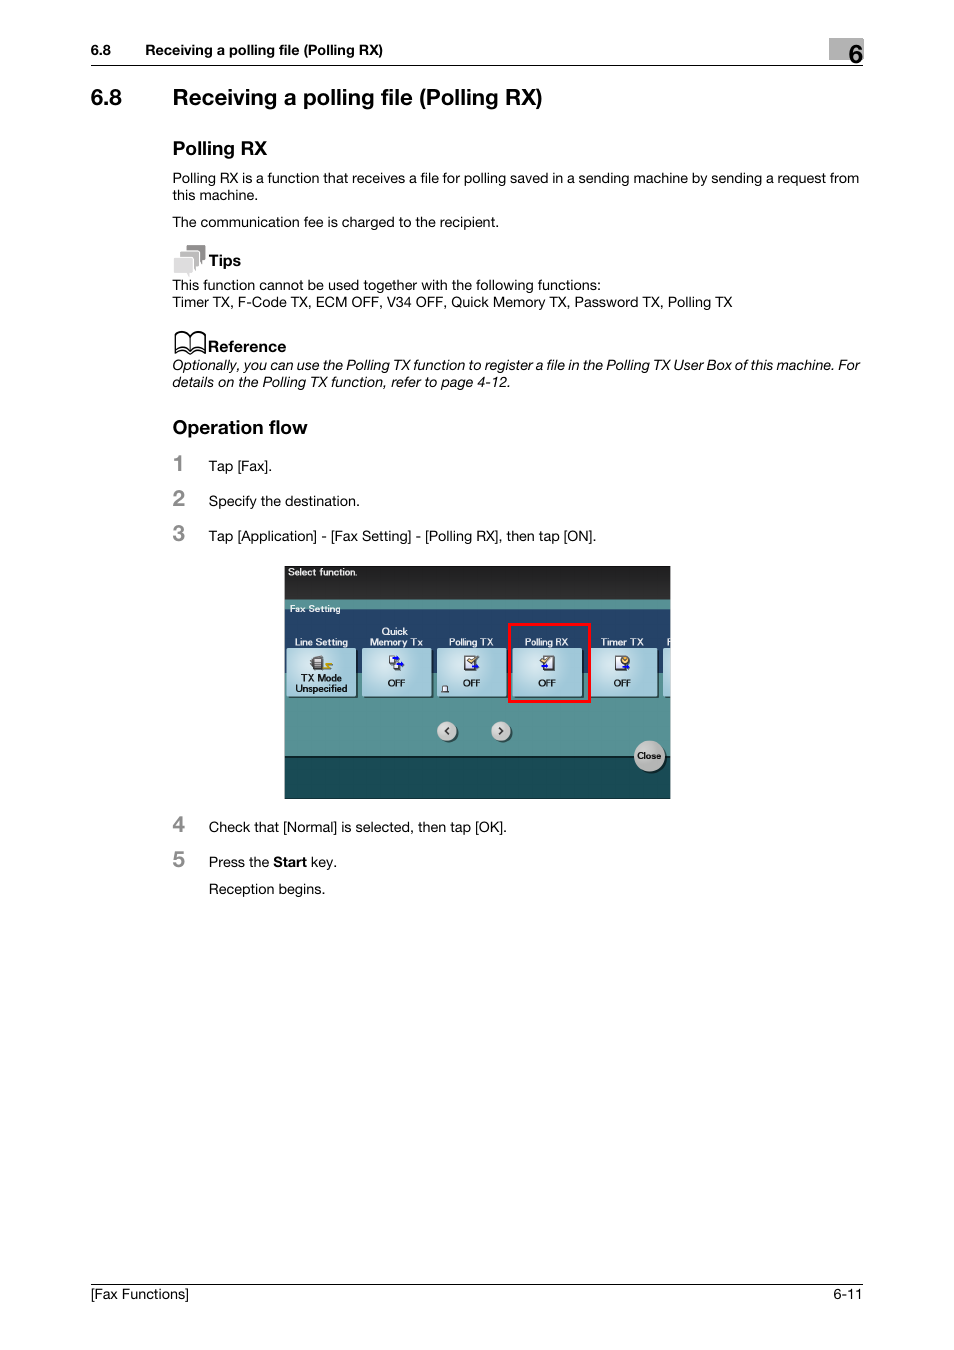 8 receiving a polling file (polling rx), Polling rx, Operation flow | Konica Minolta bizhub 4750 User Manual | Page 53 / 69